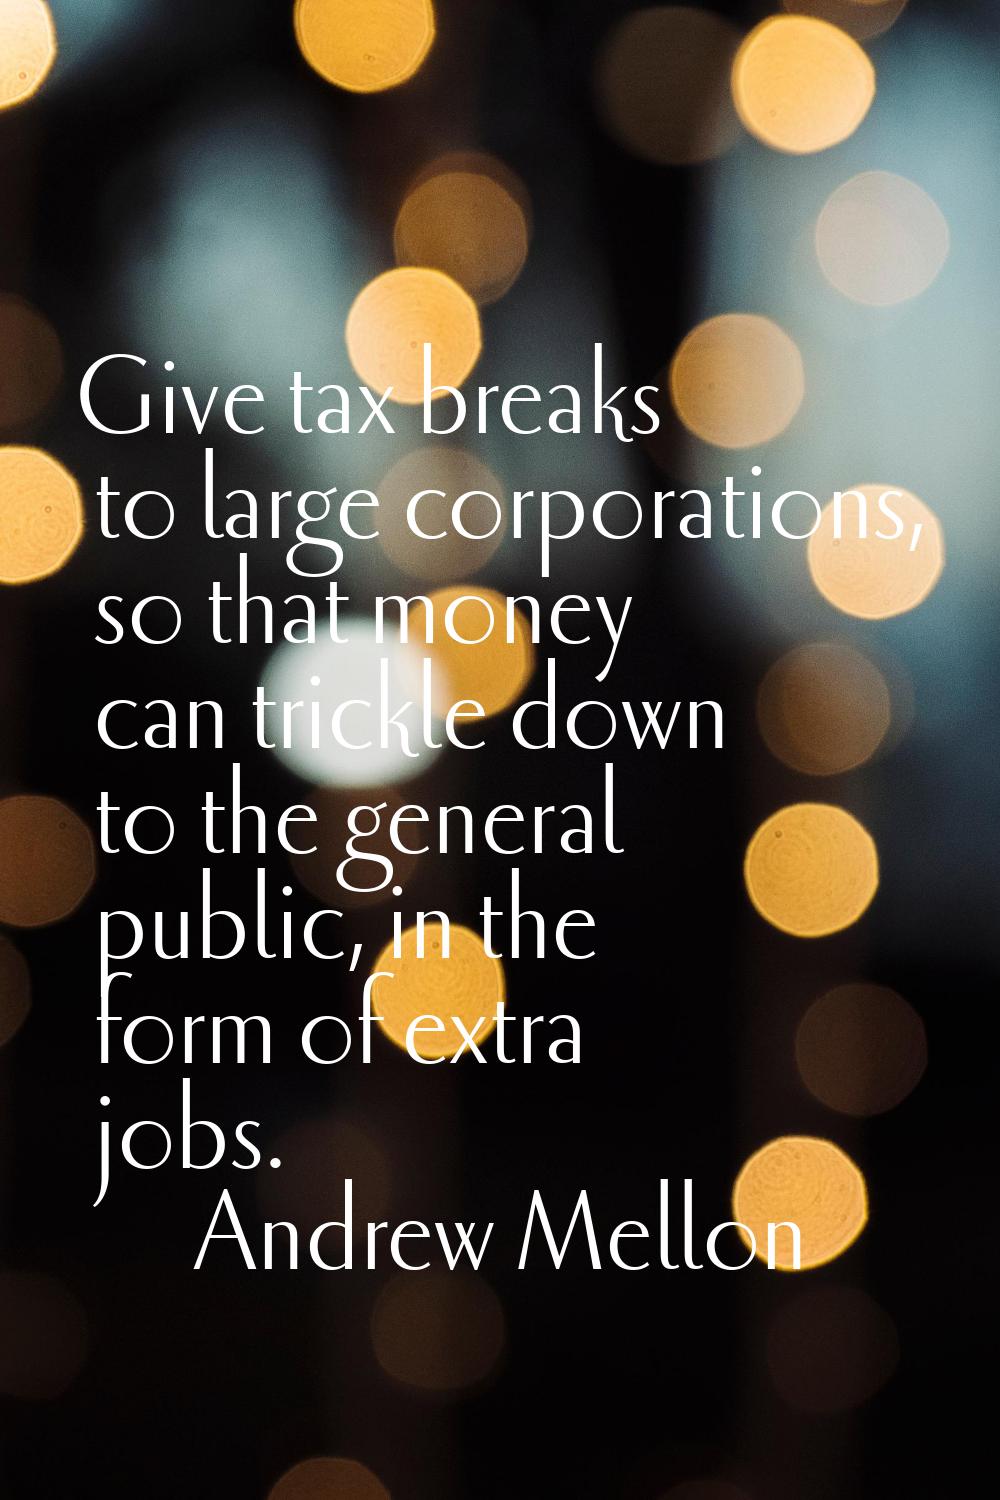 Give tax breaks to large corporations, so that money can trickle down to the general public, in the